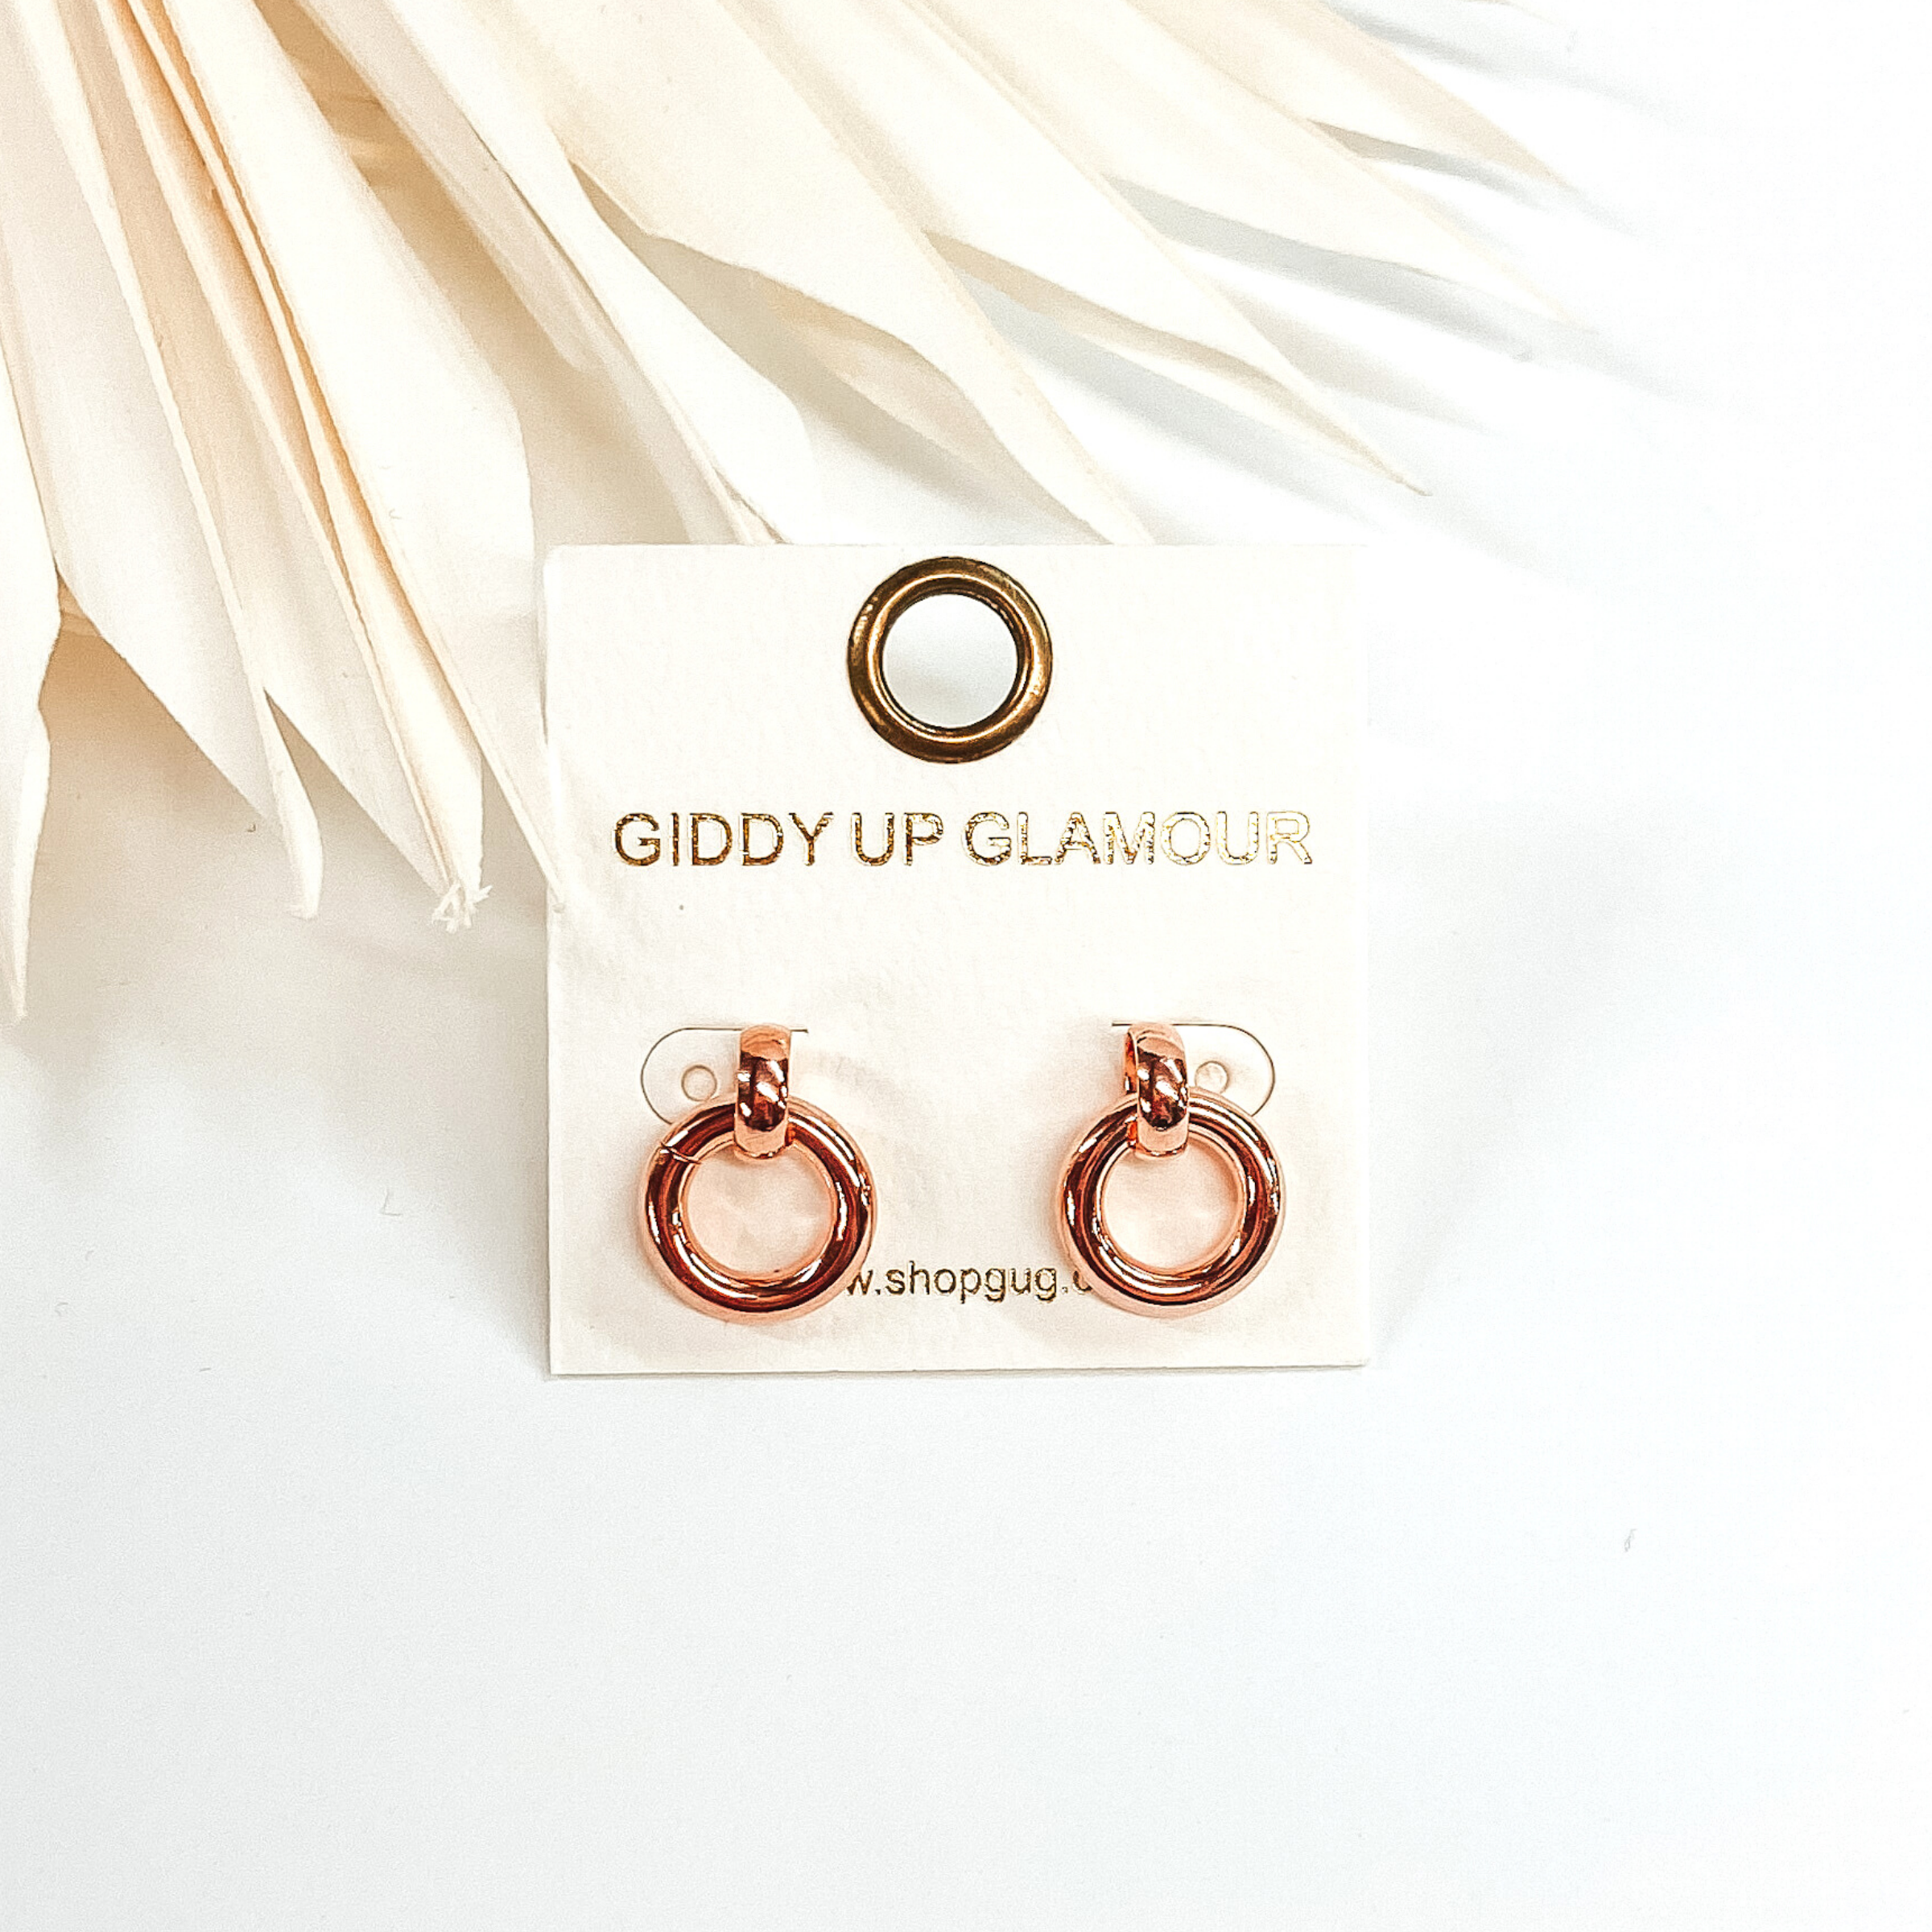 Tiny circle drop earrings in rose girl. These earrings are pictured in front of white leaves and on a white background.